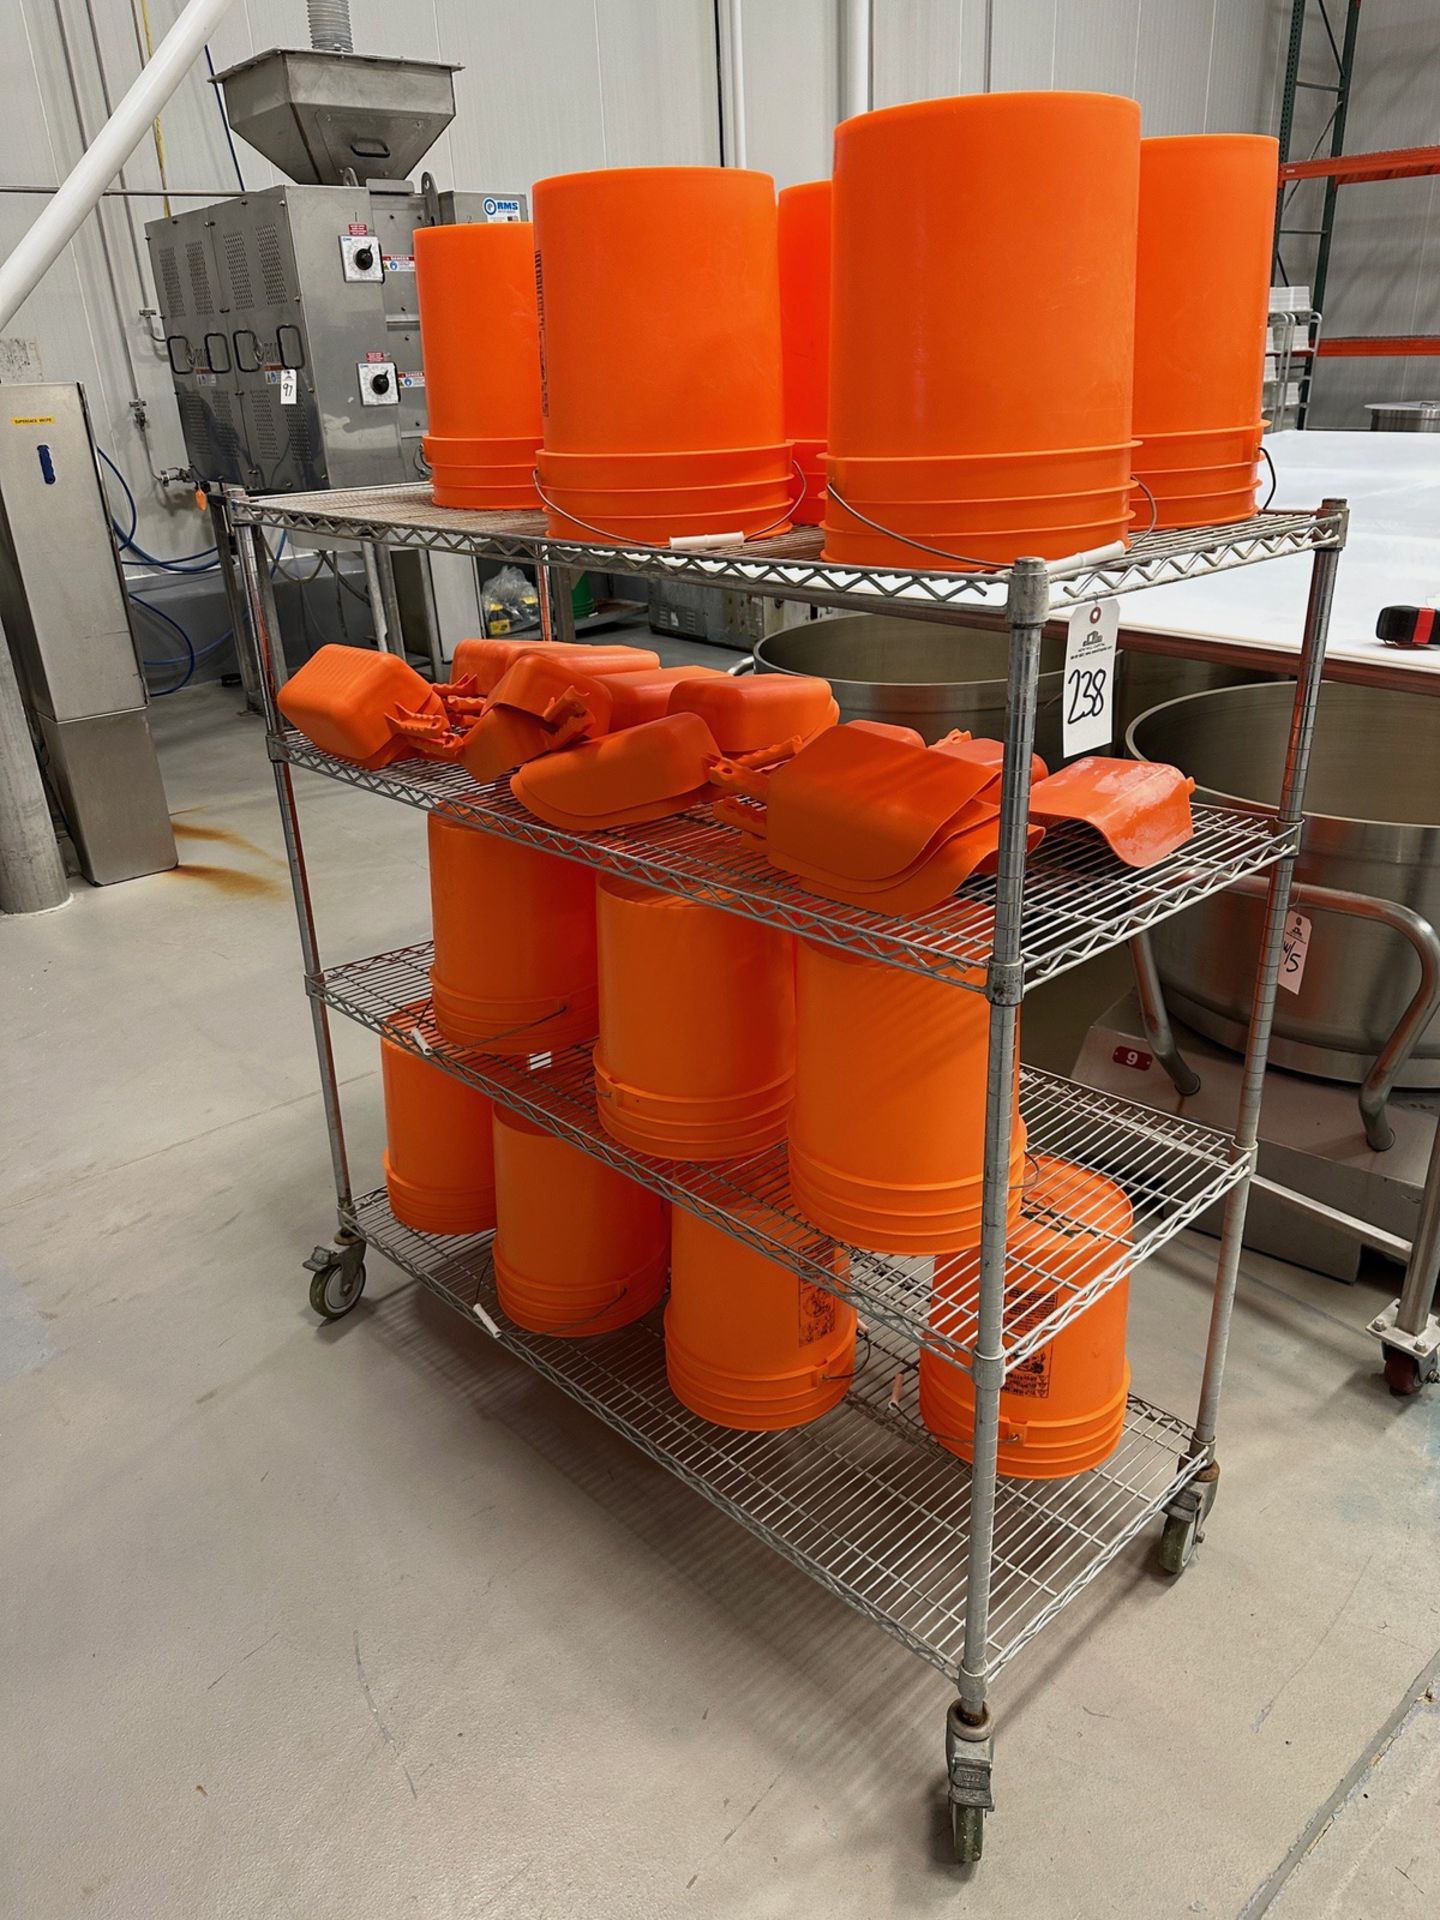 Lot of Orange Plastic Buckets and Scoops with Wire Shelving Unit (Approx. 5' x 2' x | Rig Fee $50